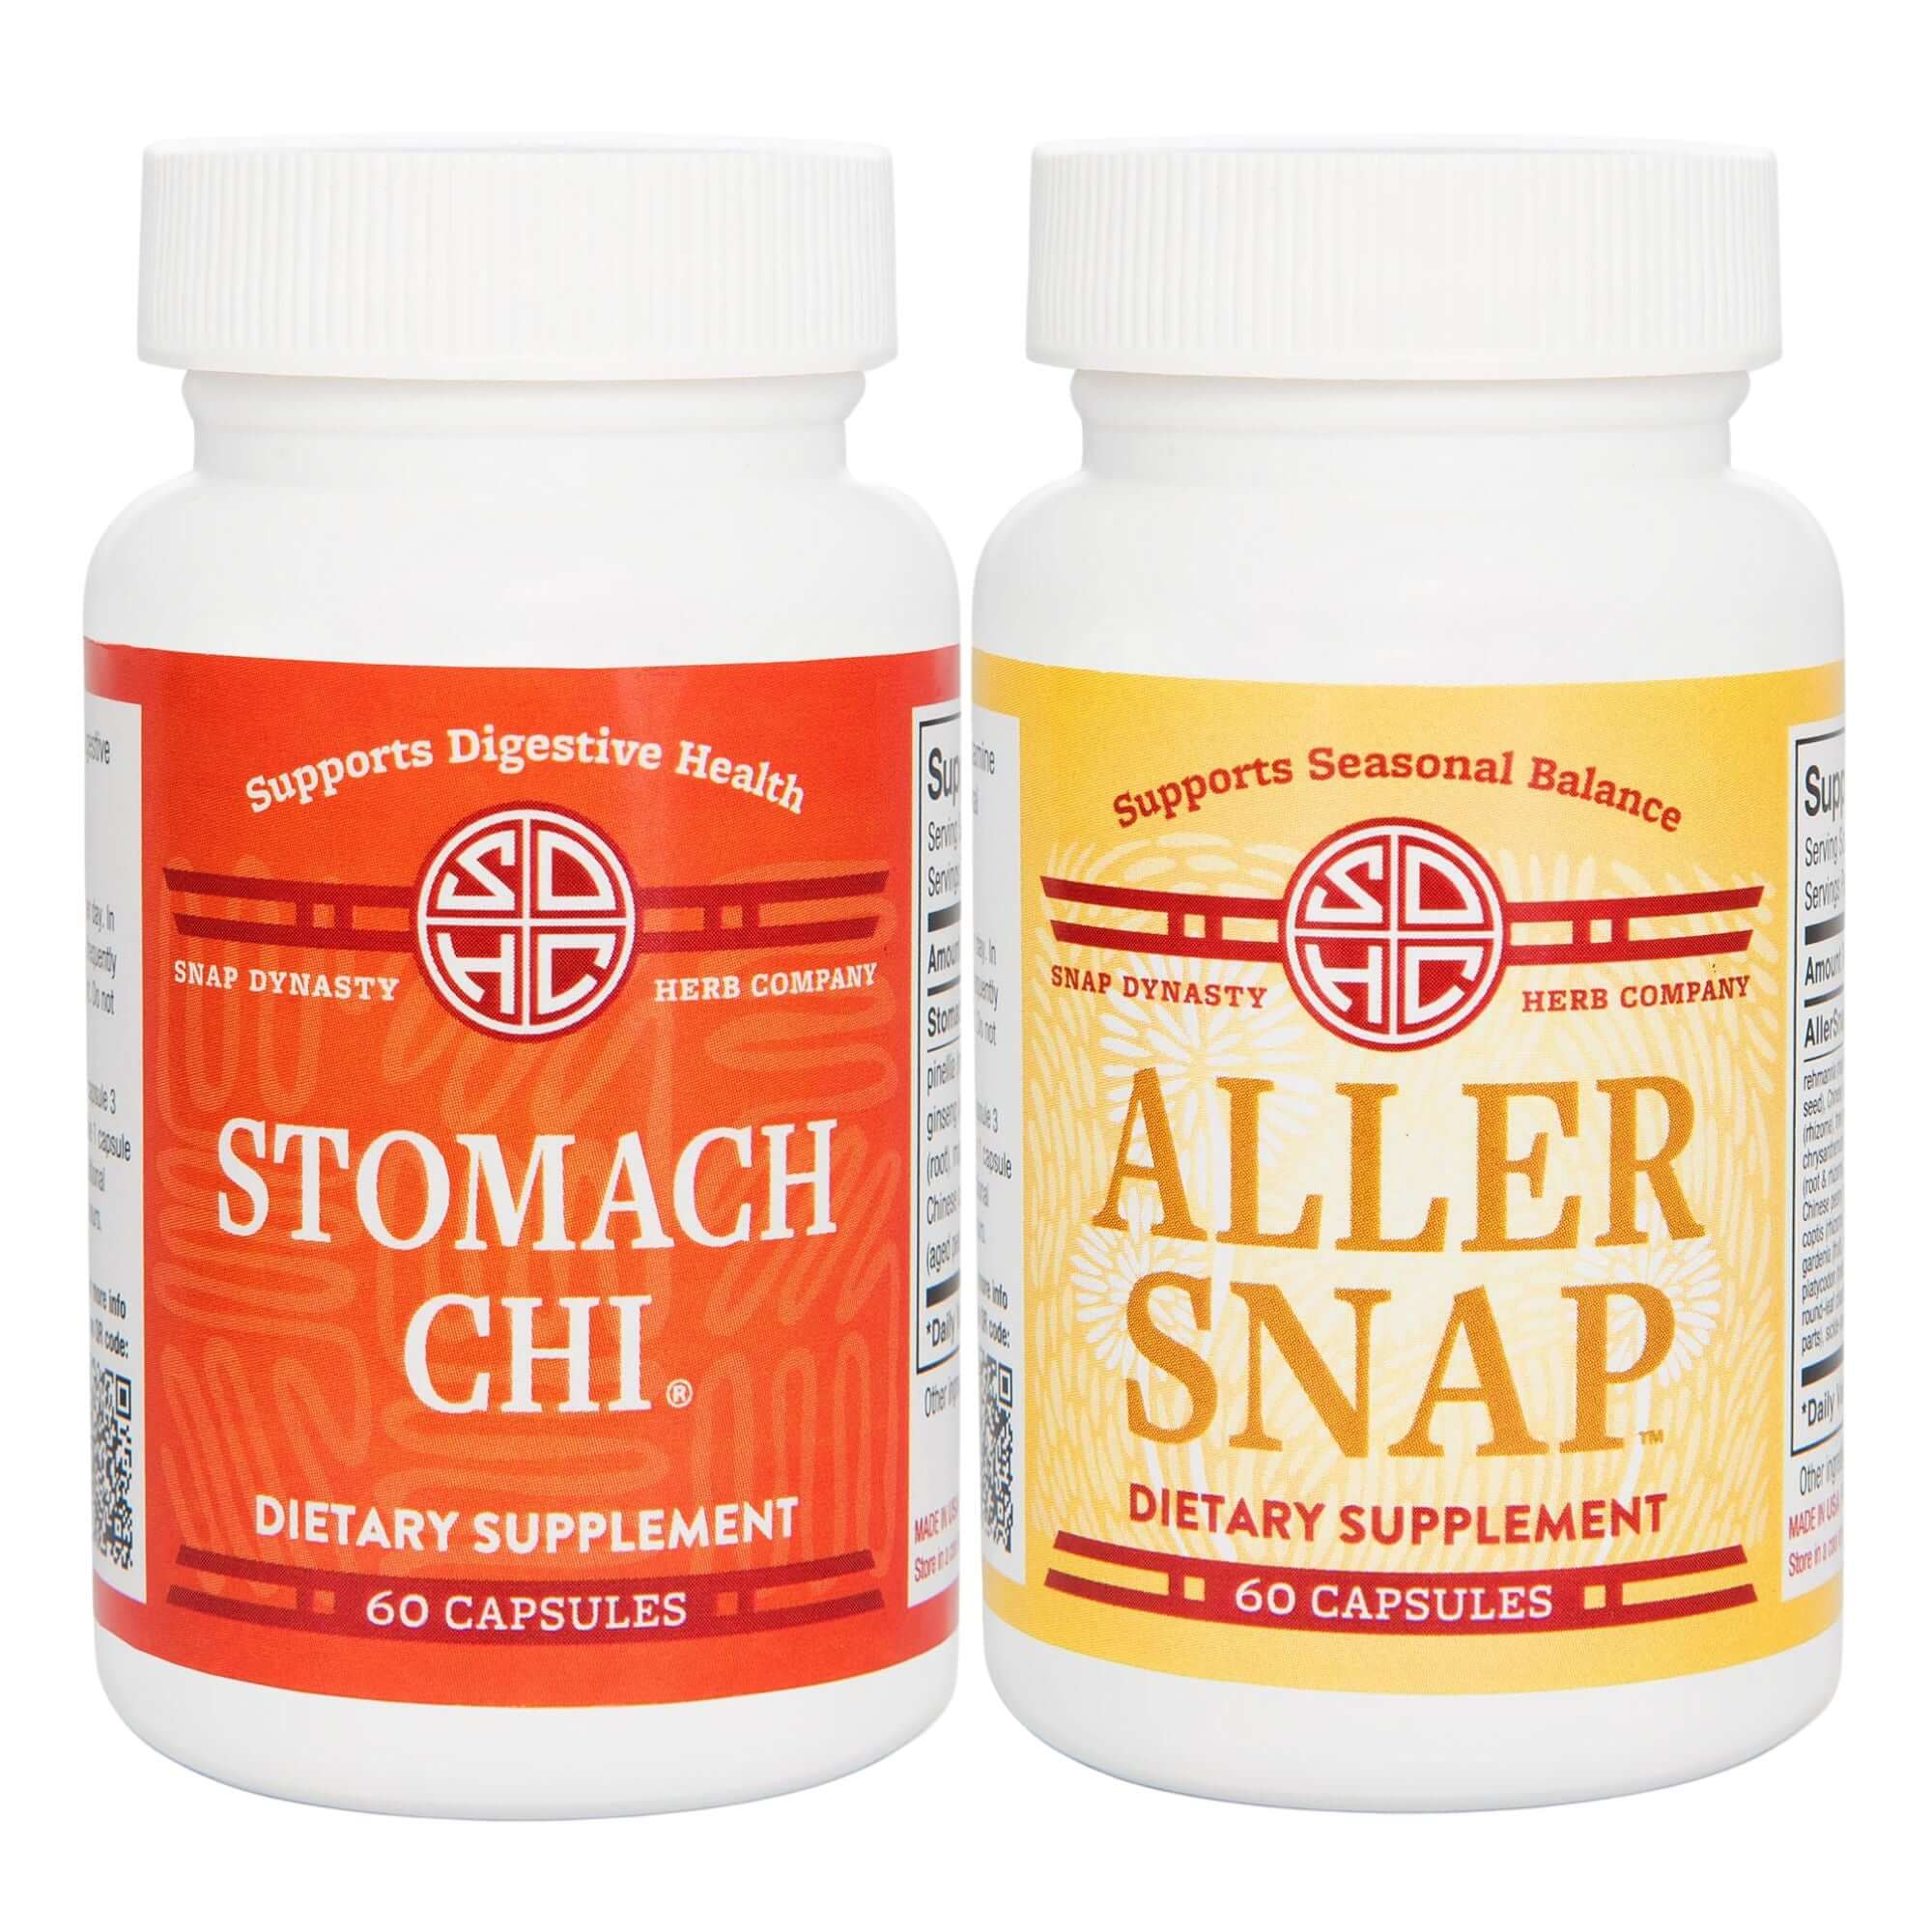 Bundle and Save! Stomach Chi and Aller Snap Capsules